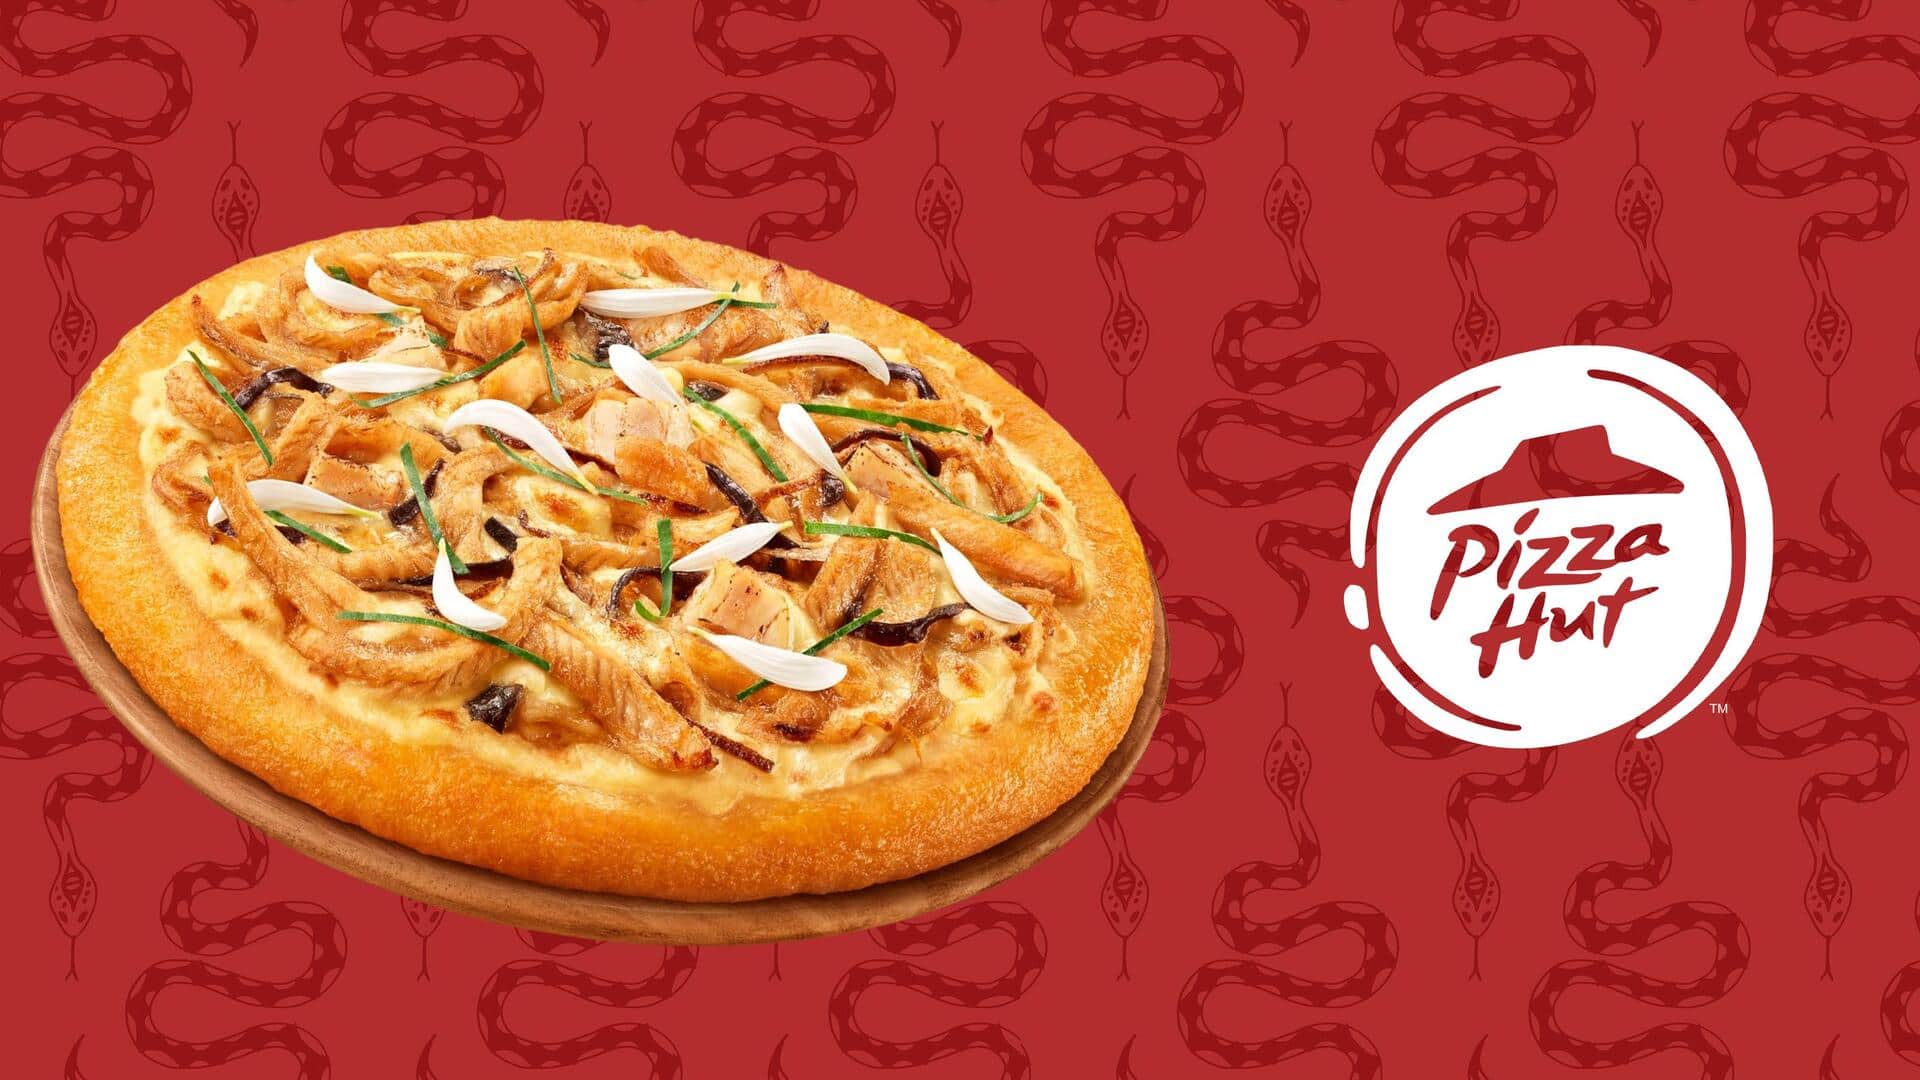 Hong Kong is offering snake pizza! Would you taste it